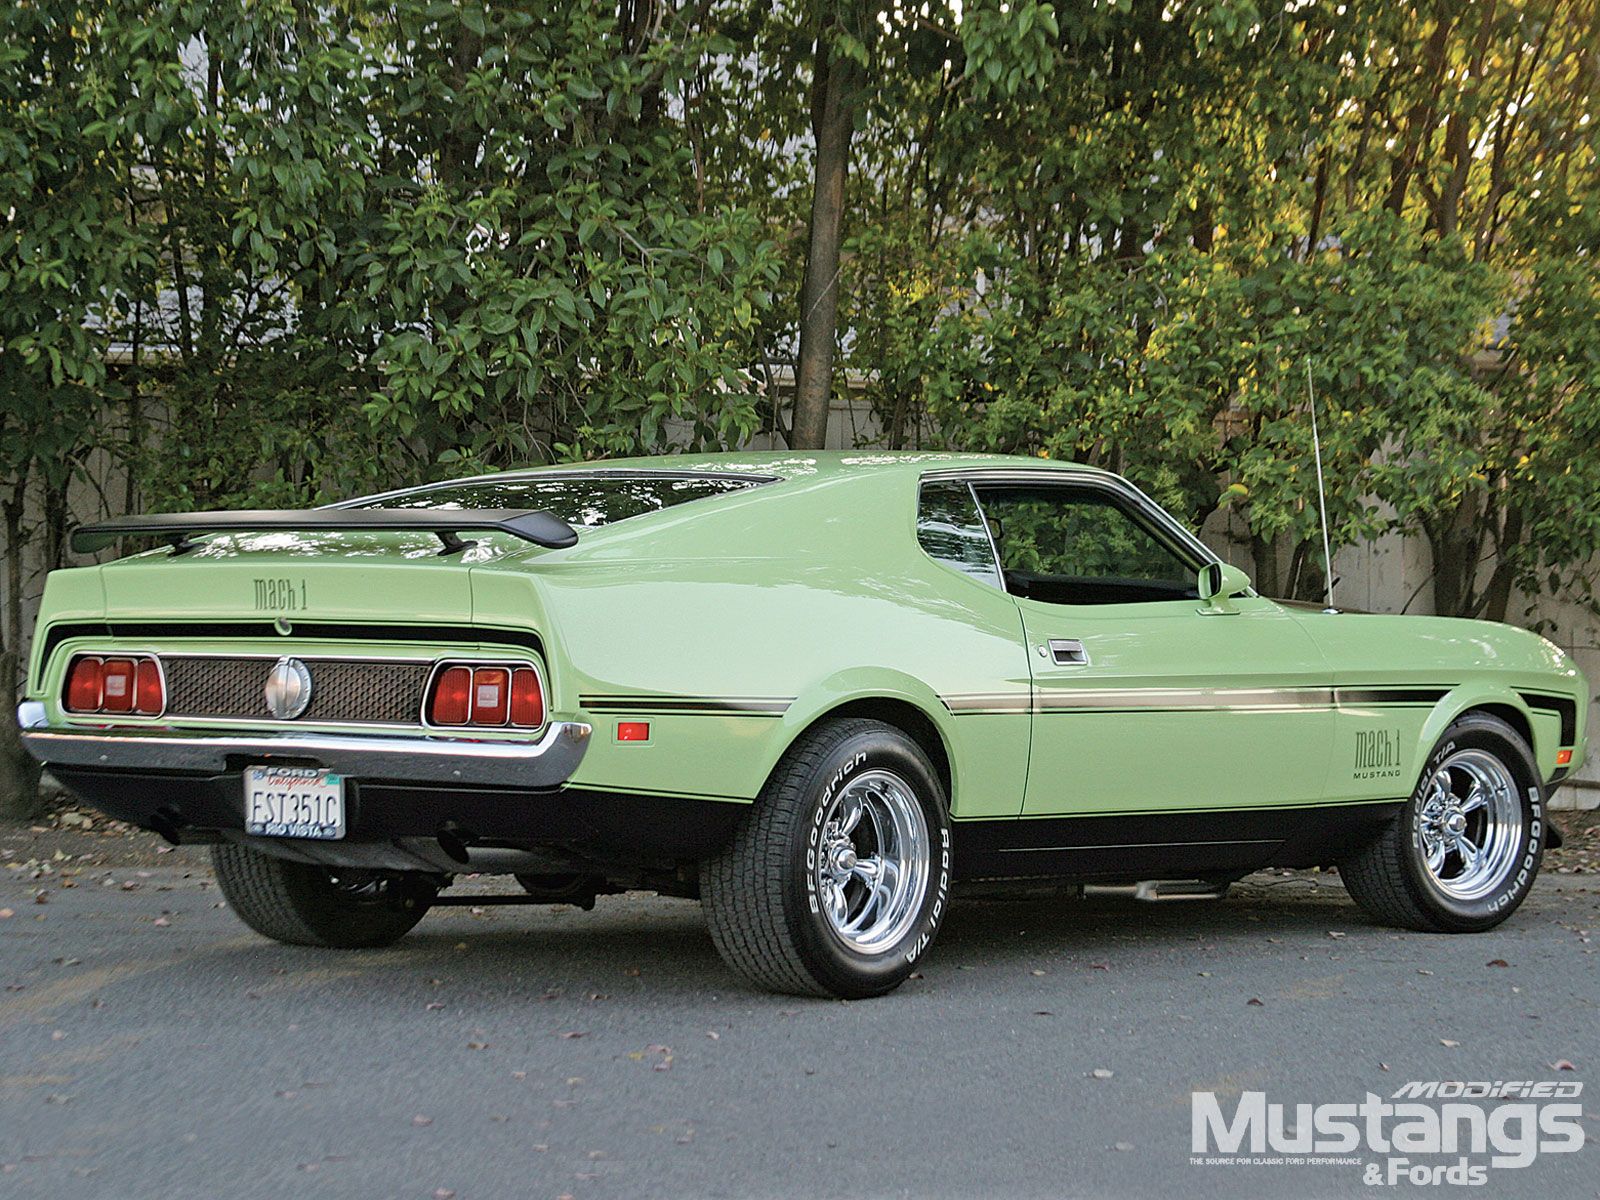 Mustang Mach 1. Ford mustang, 1971